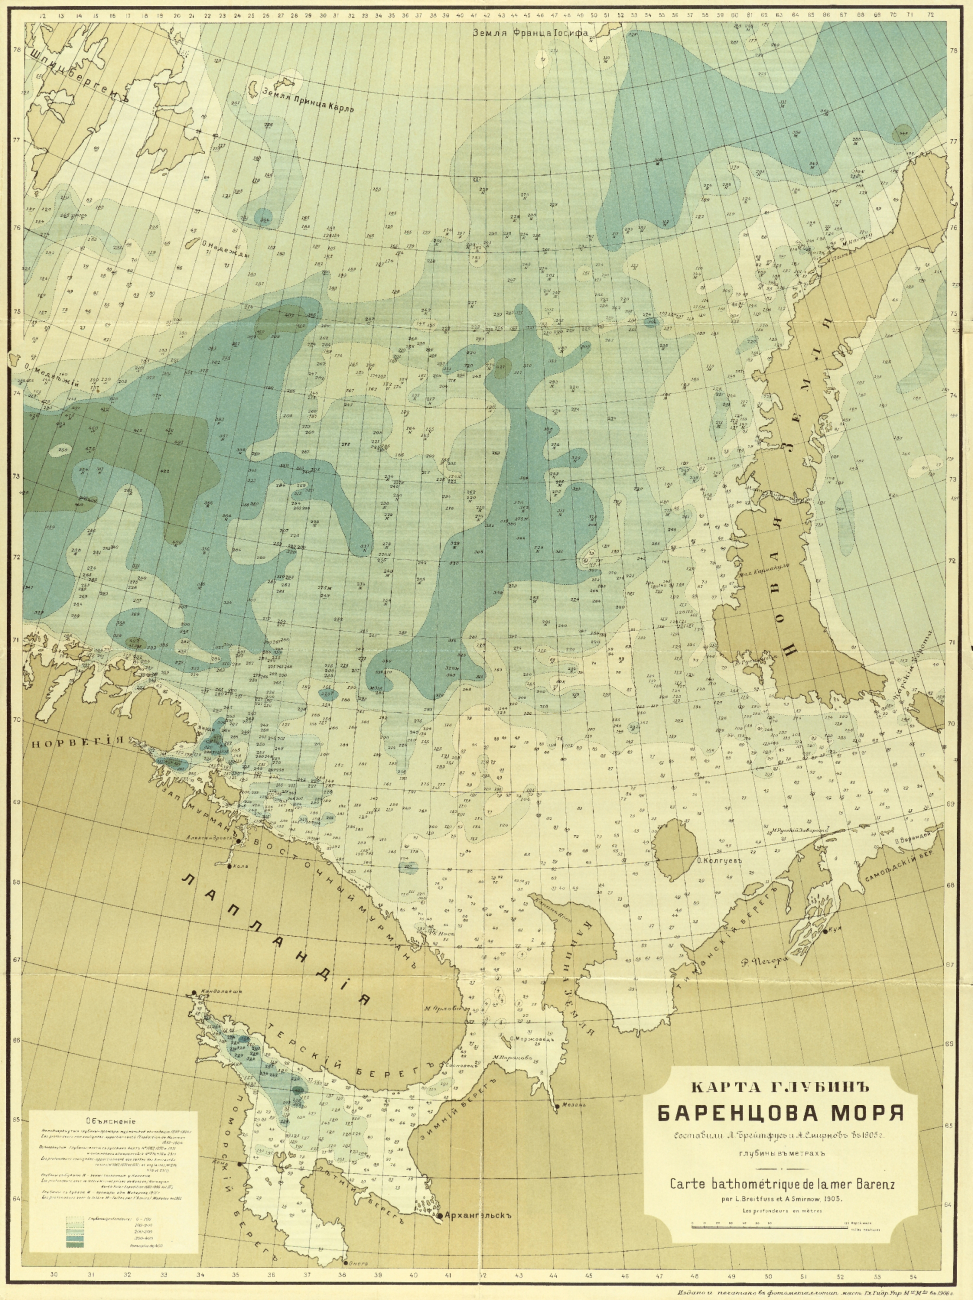 A Russian map of the Barents Sea by L